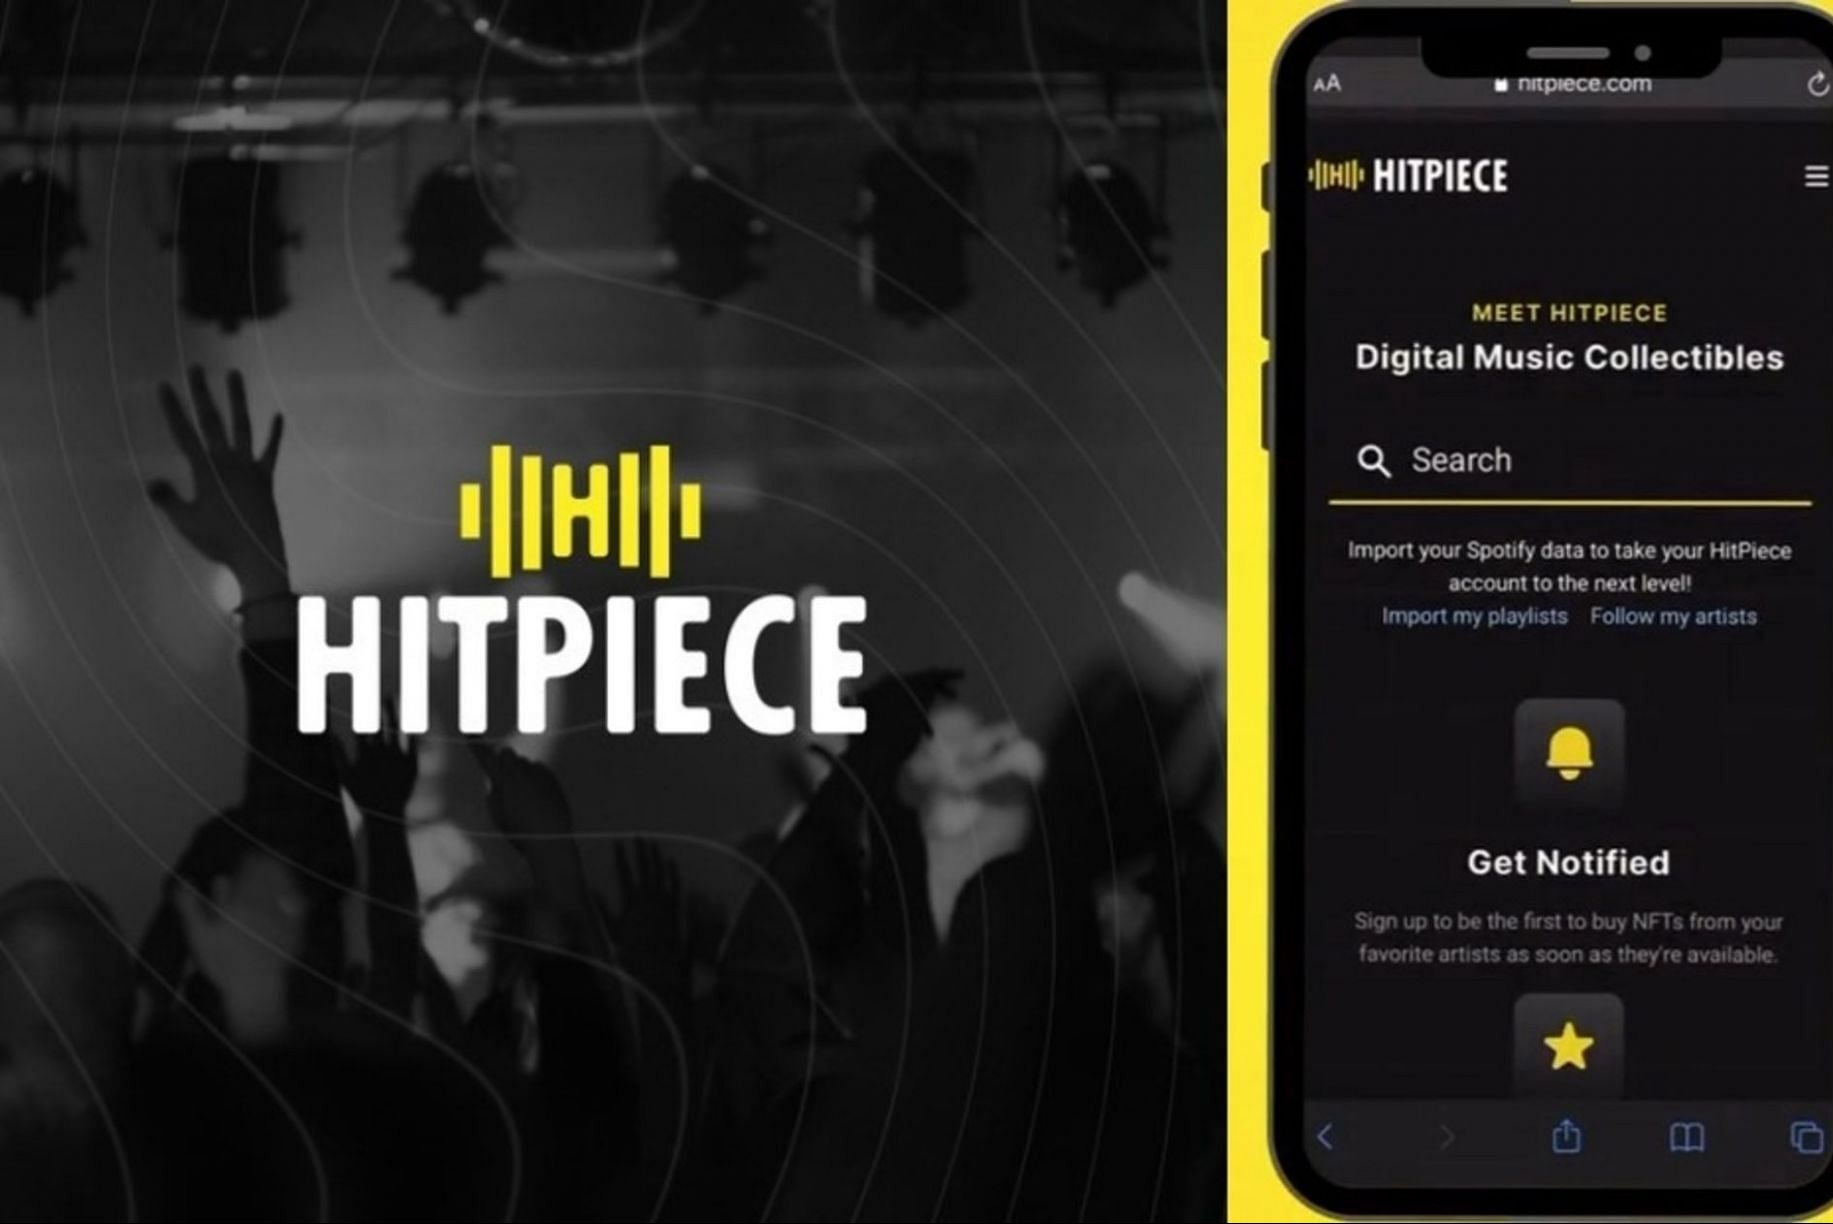 A site called HitPiece is now in hot water after trying to sell music as NFTs.